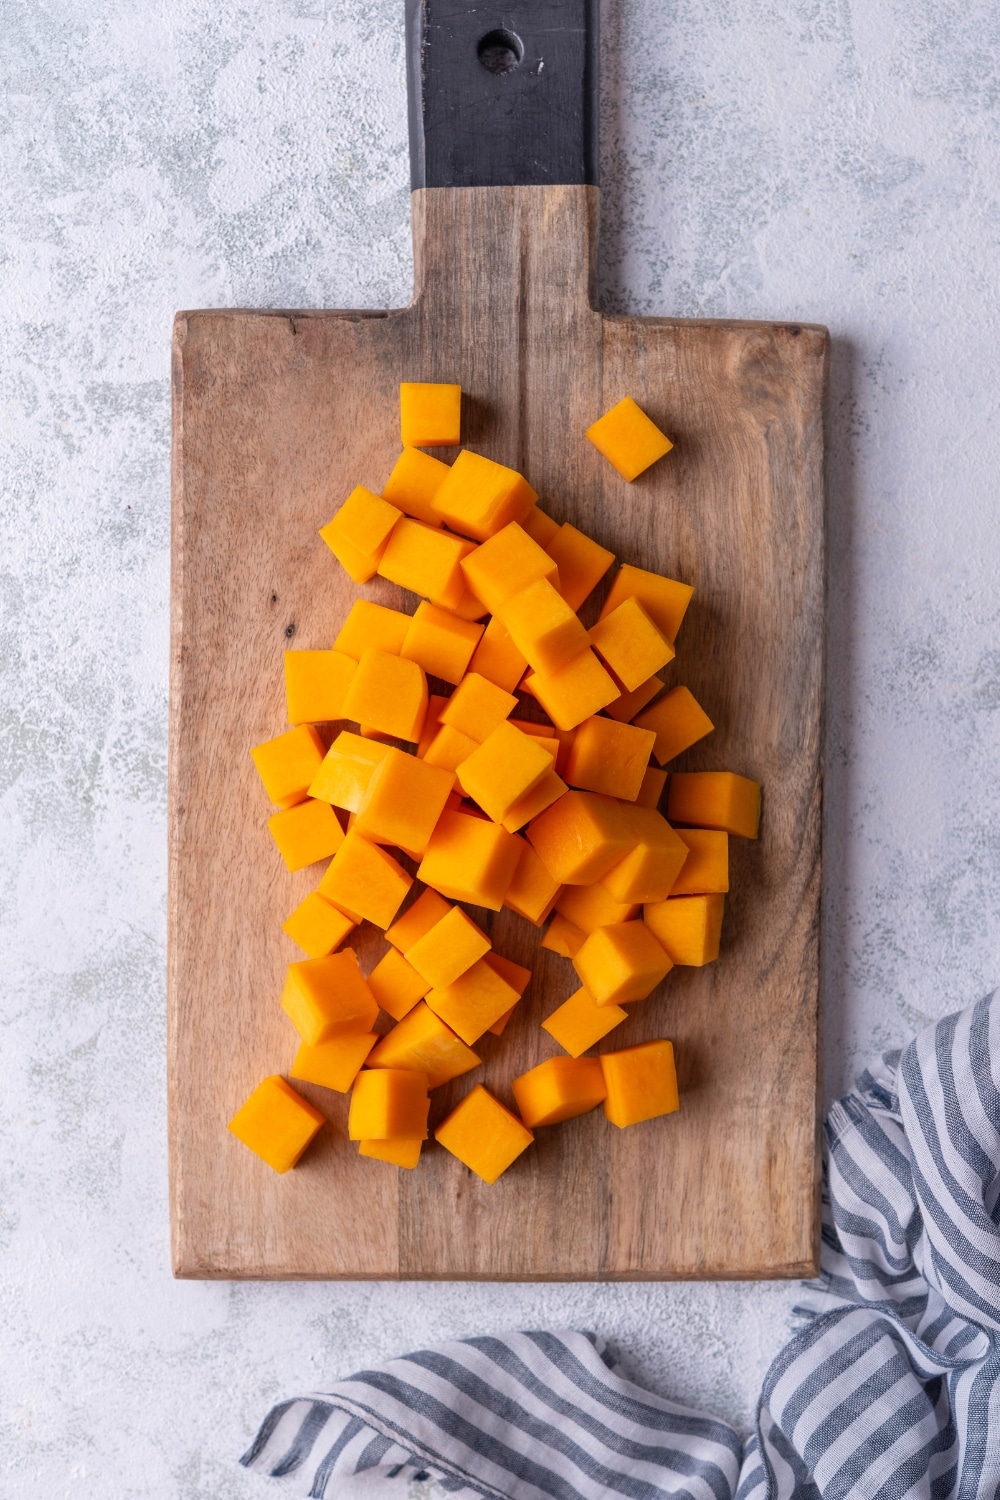 Raw butternut squash cubes on a wooden cutting board with a black handle. The cutting board is resting on a grey countertop.